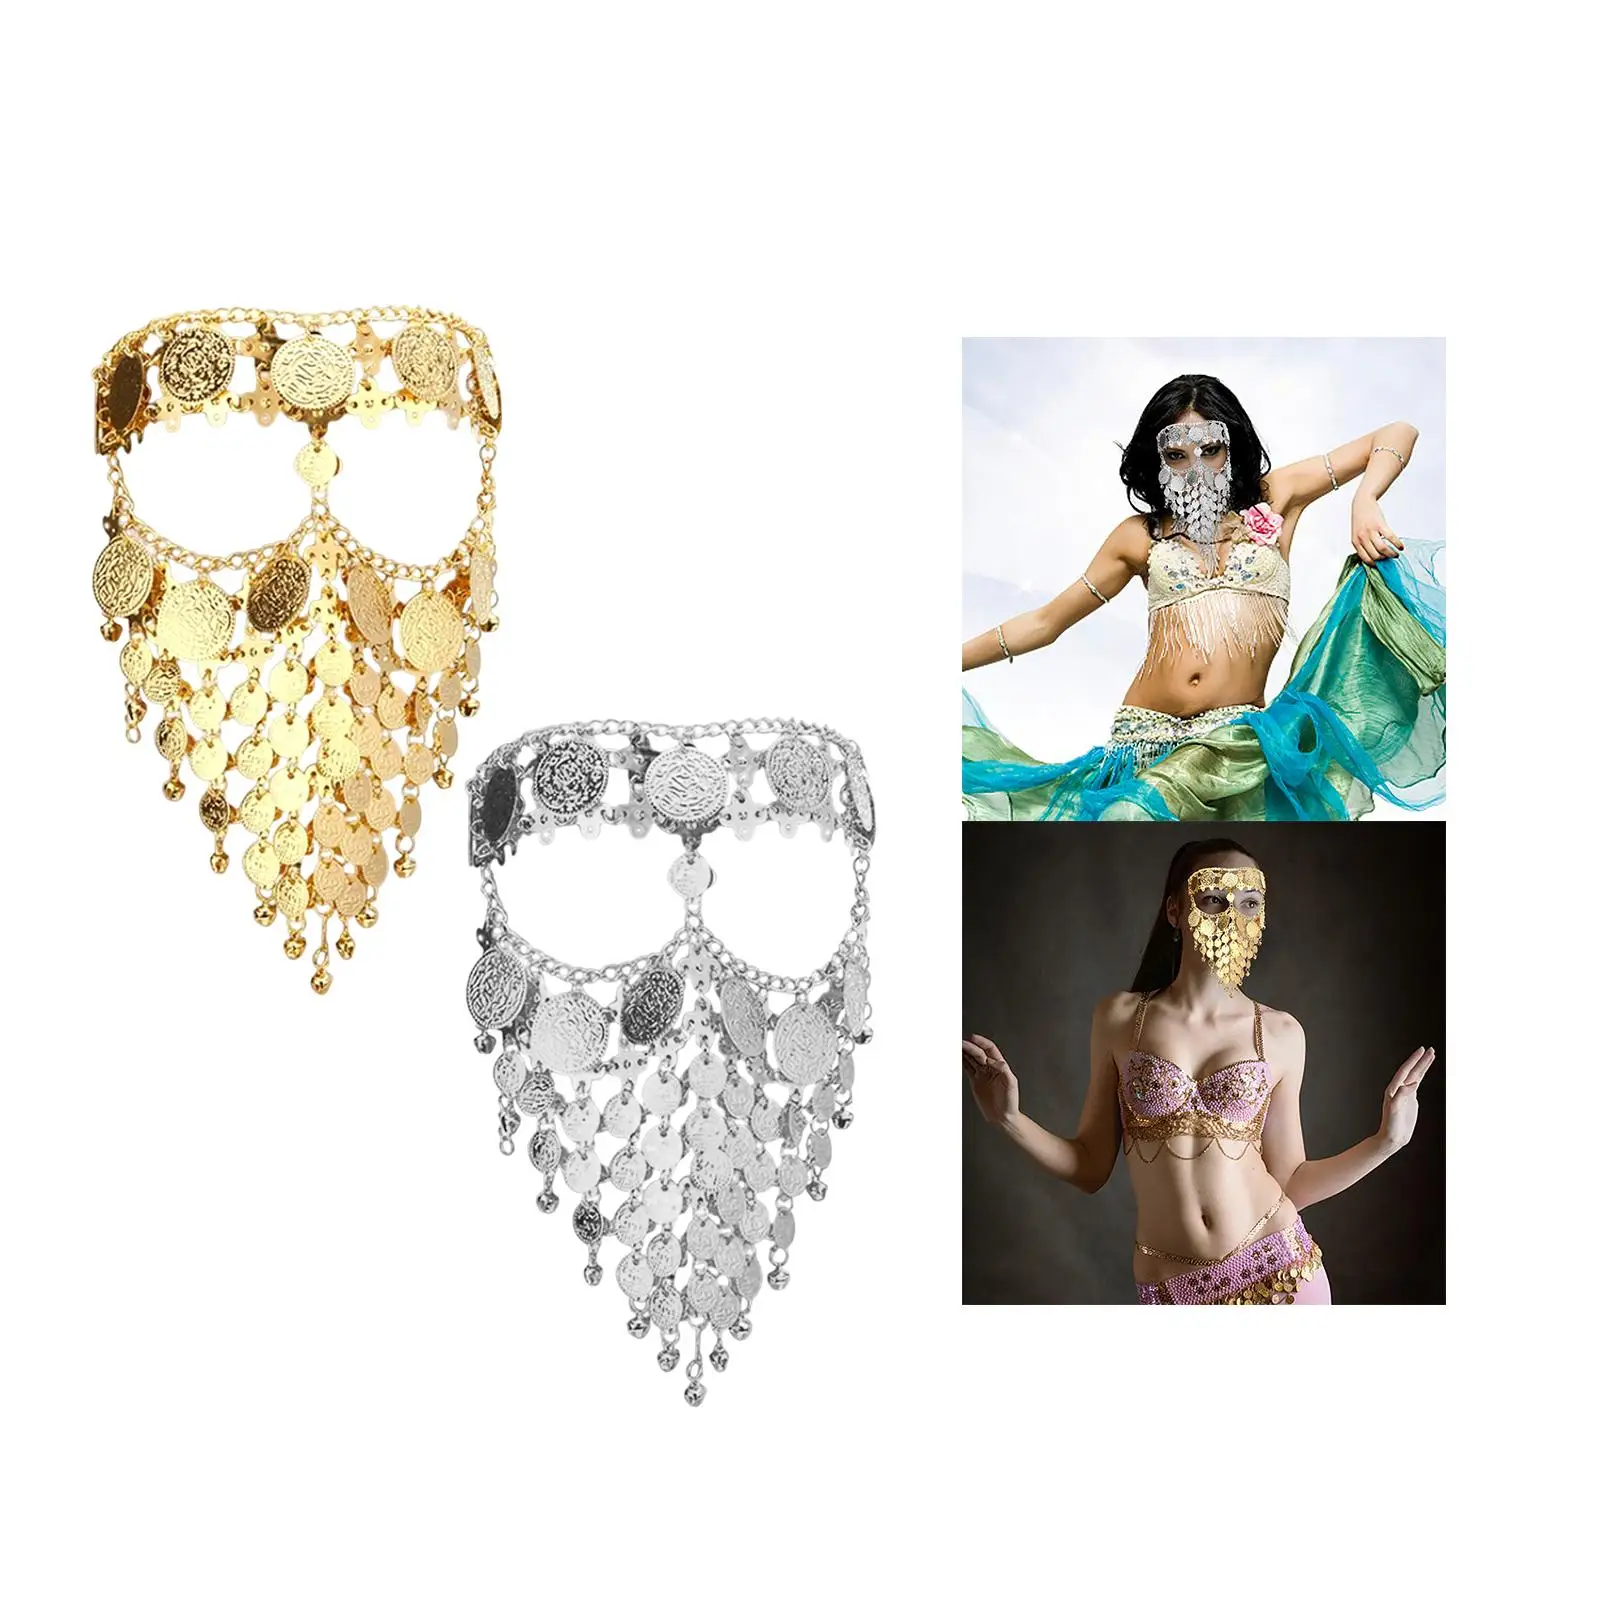 Belly, Metals Dancing Accessories Masquerade for Costume Party Supplies